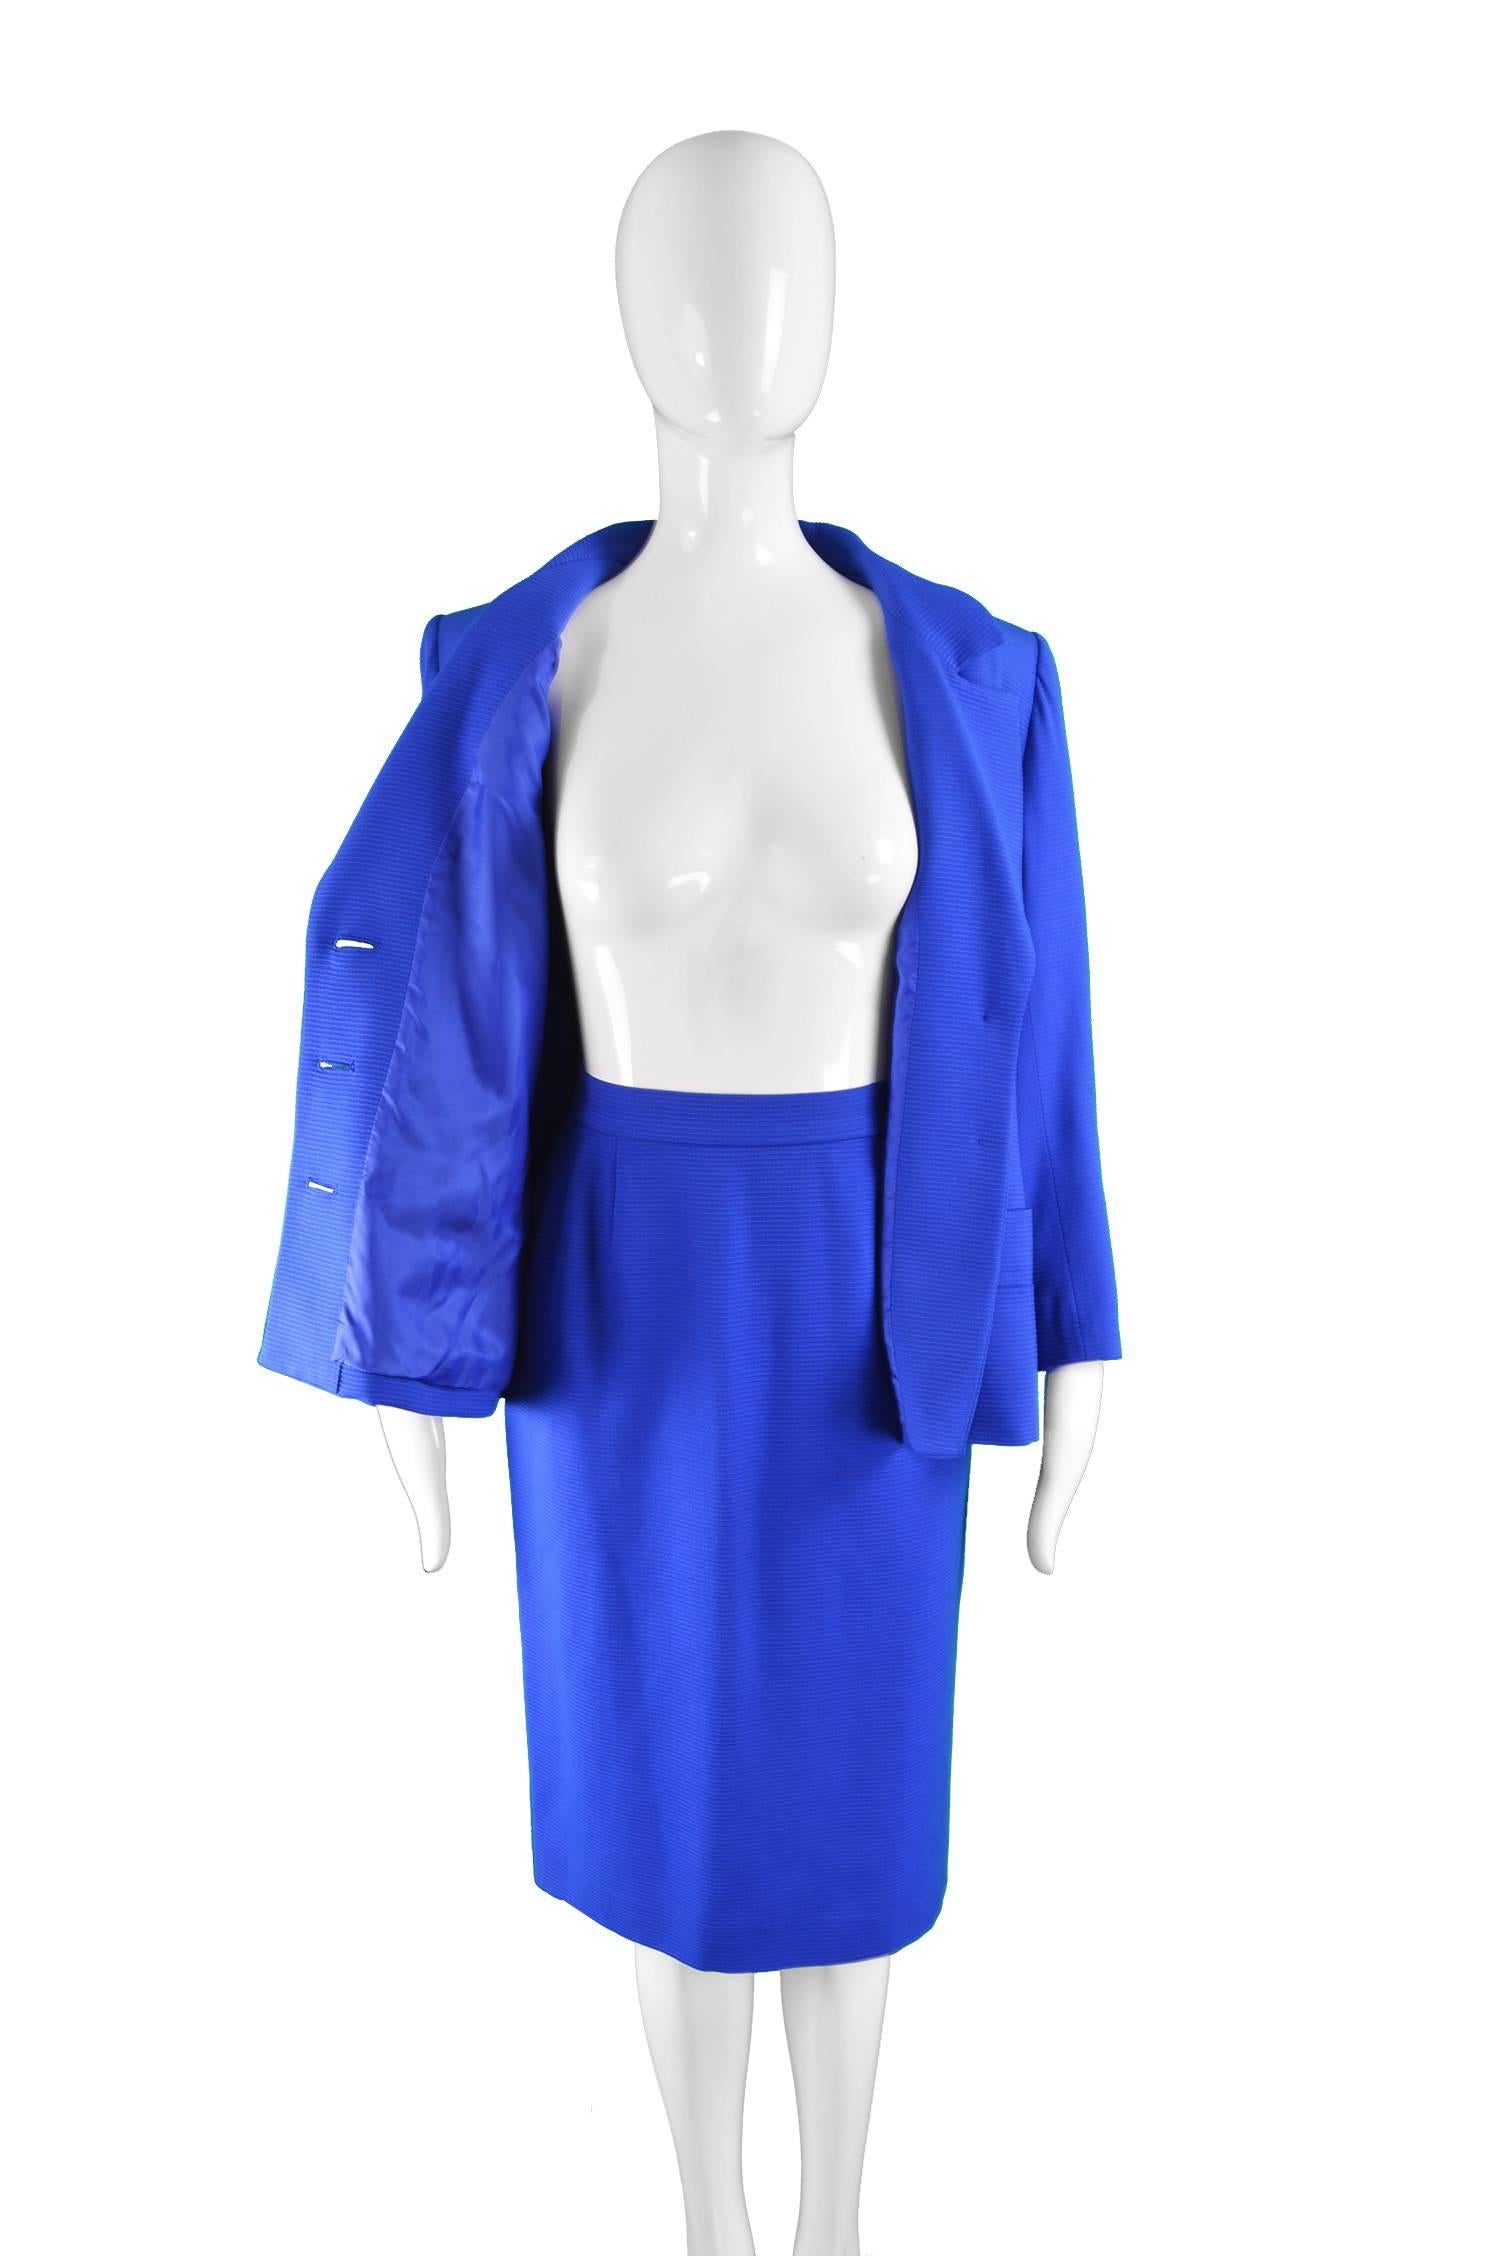 Women's Yves Saint Laurent Blue Wool Blazer and Skirt Suit with Heart Buttons, 1980s